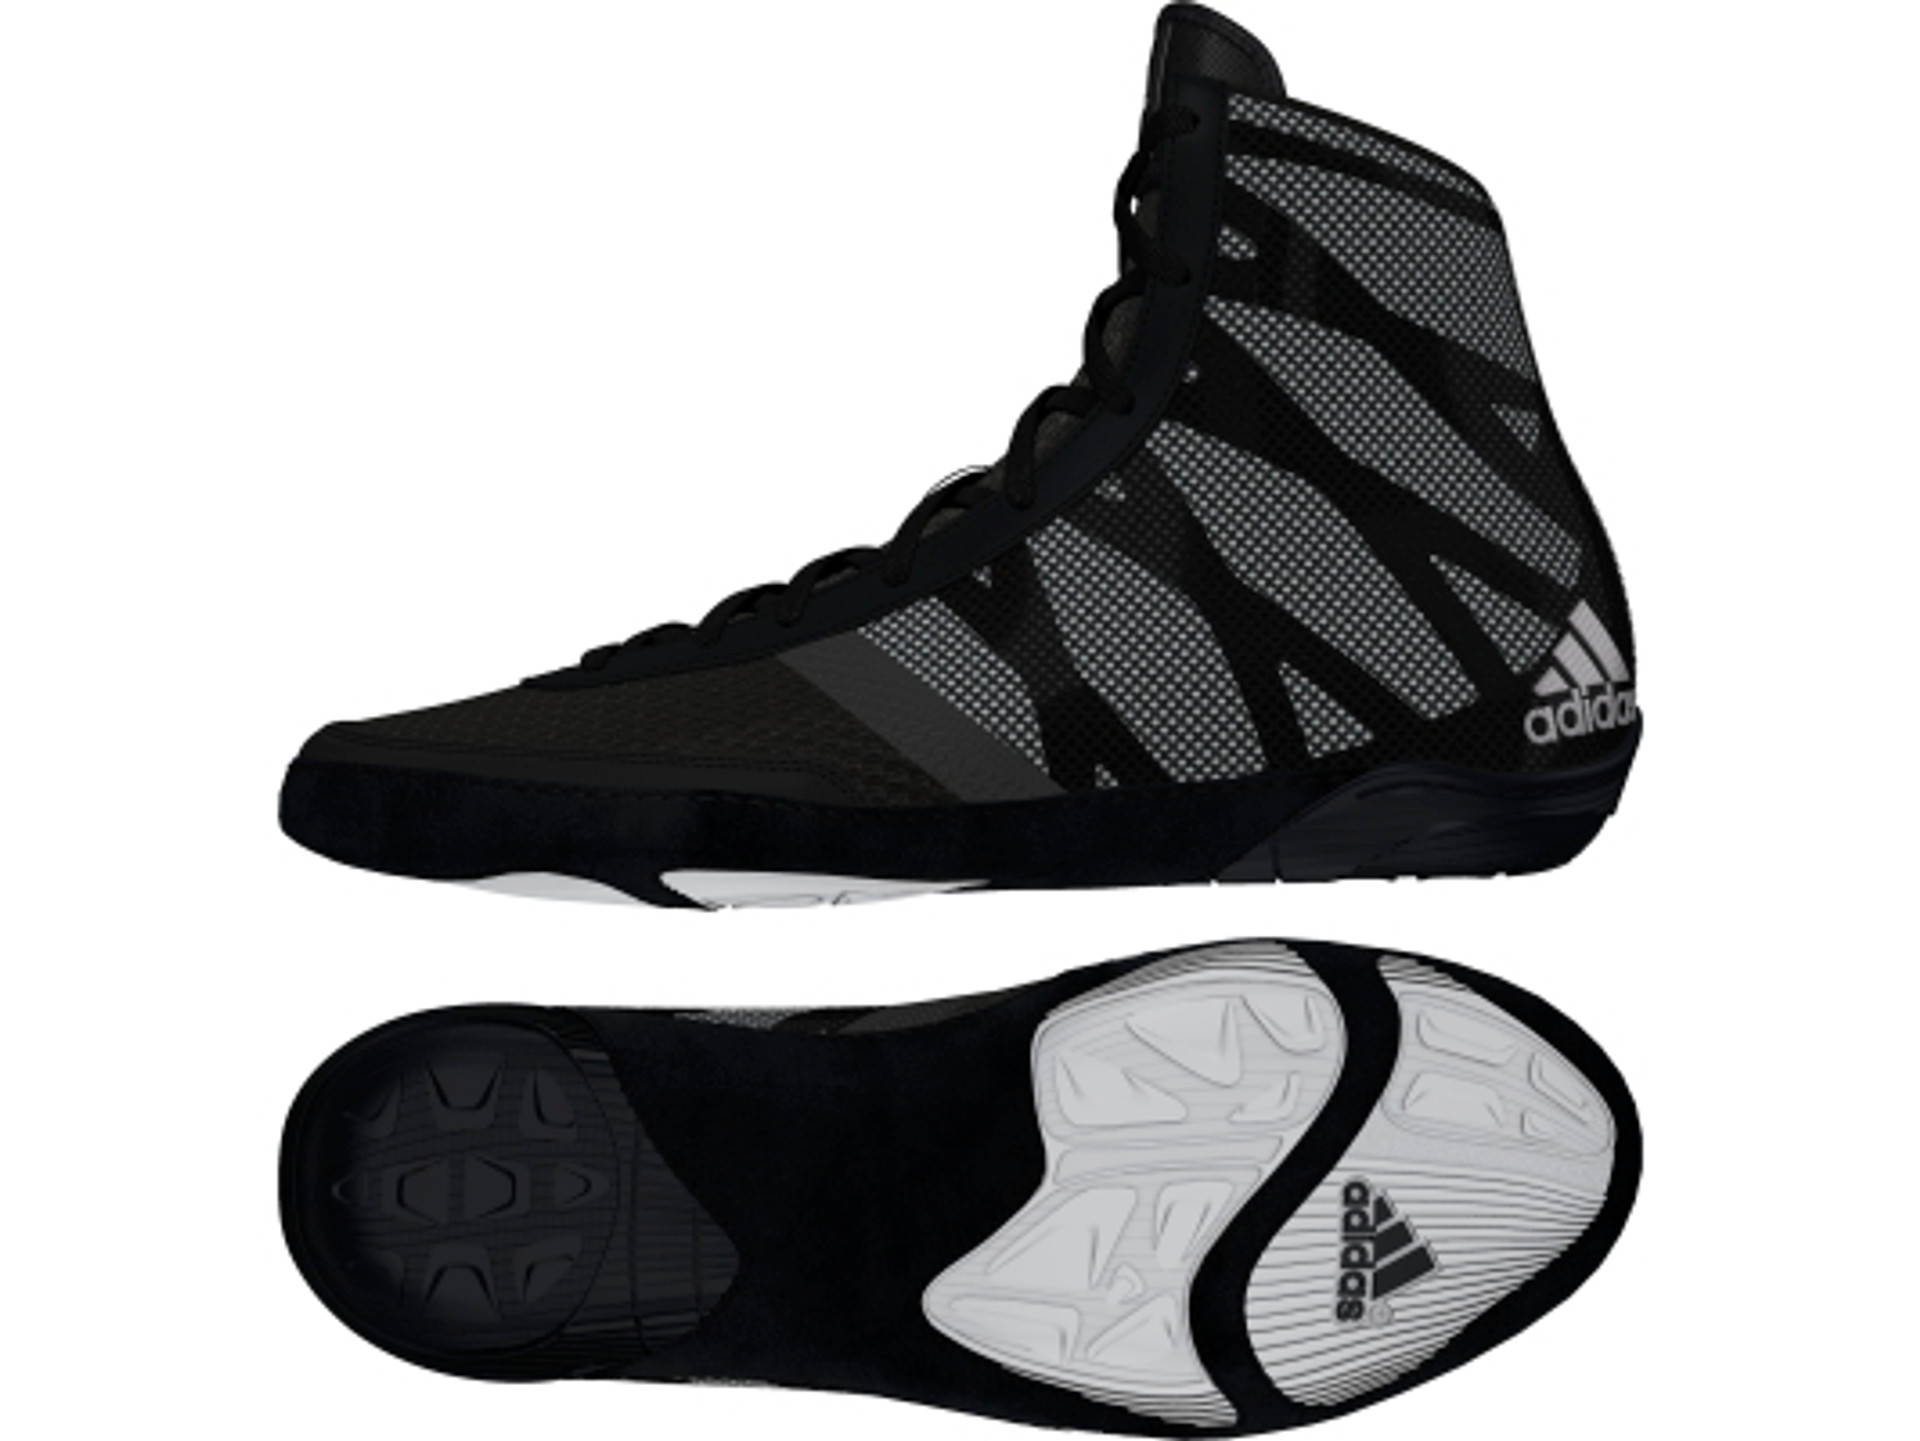 Adidas Wrestling Shoes for Powerlifting